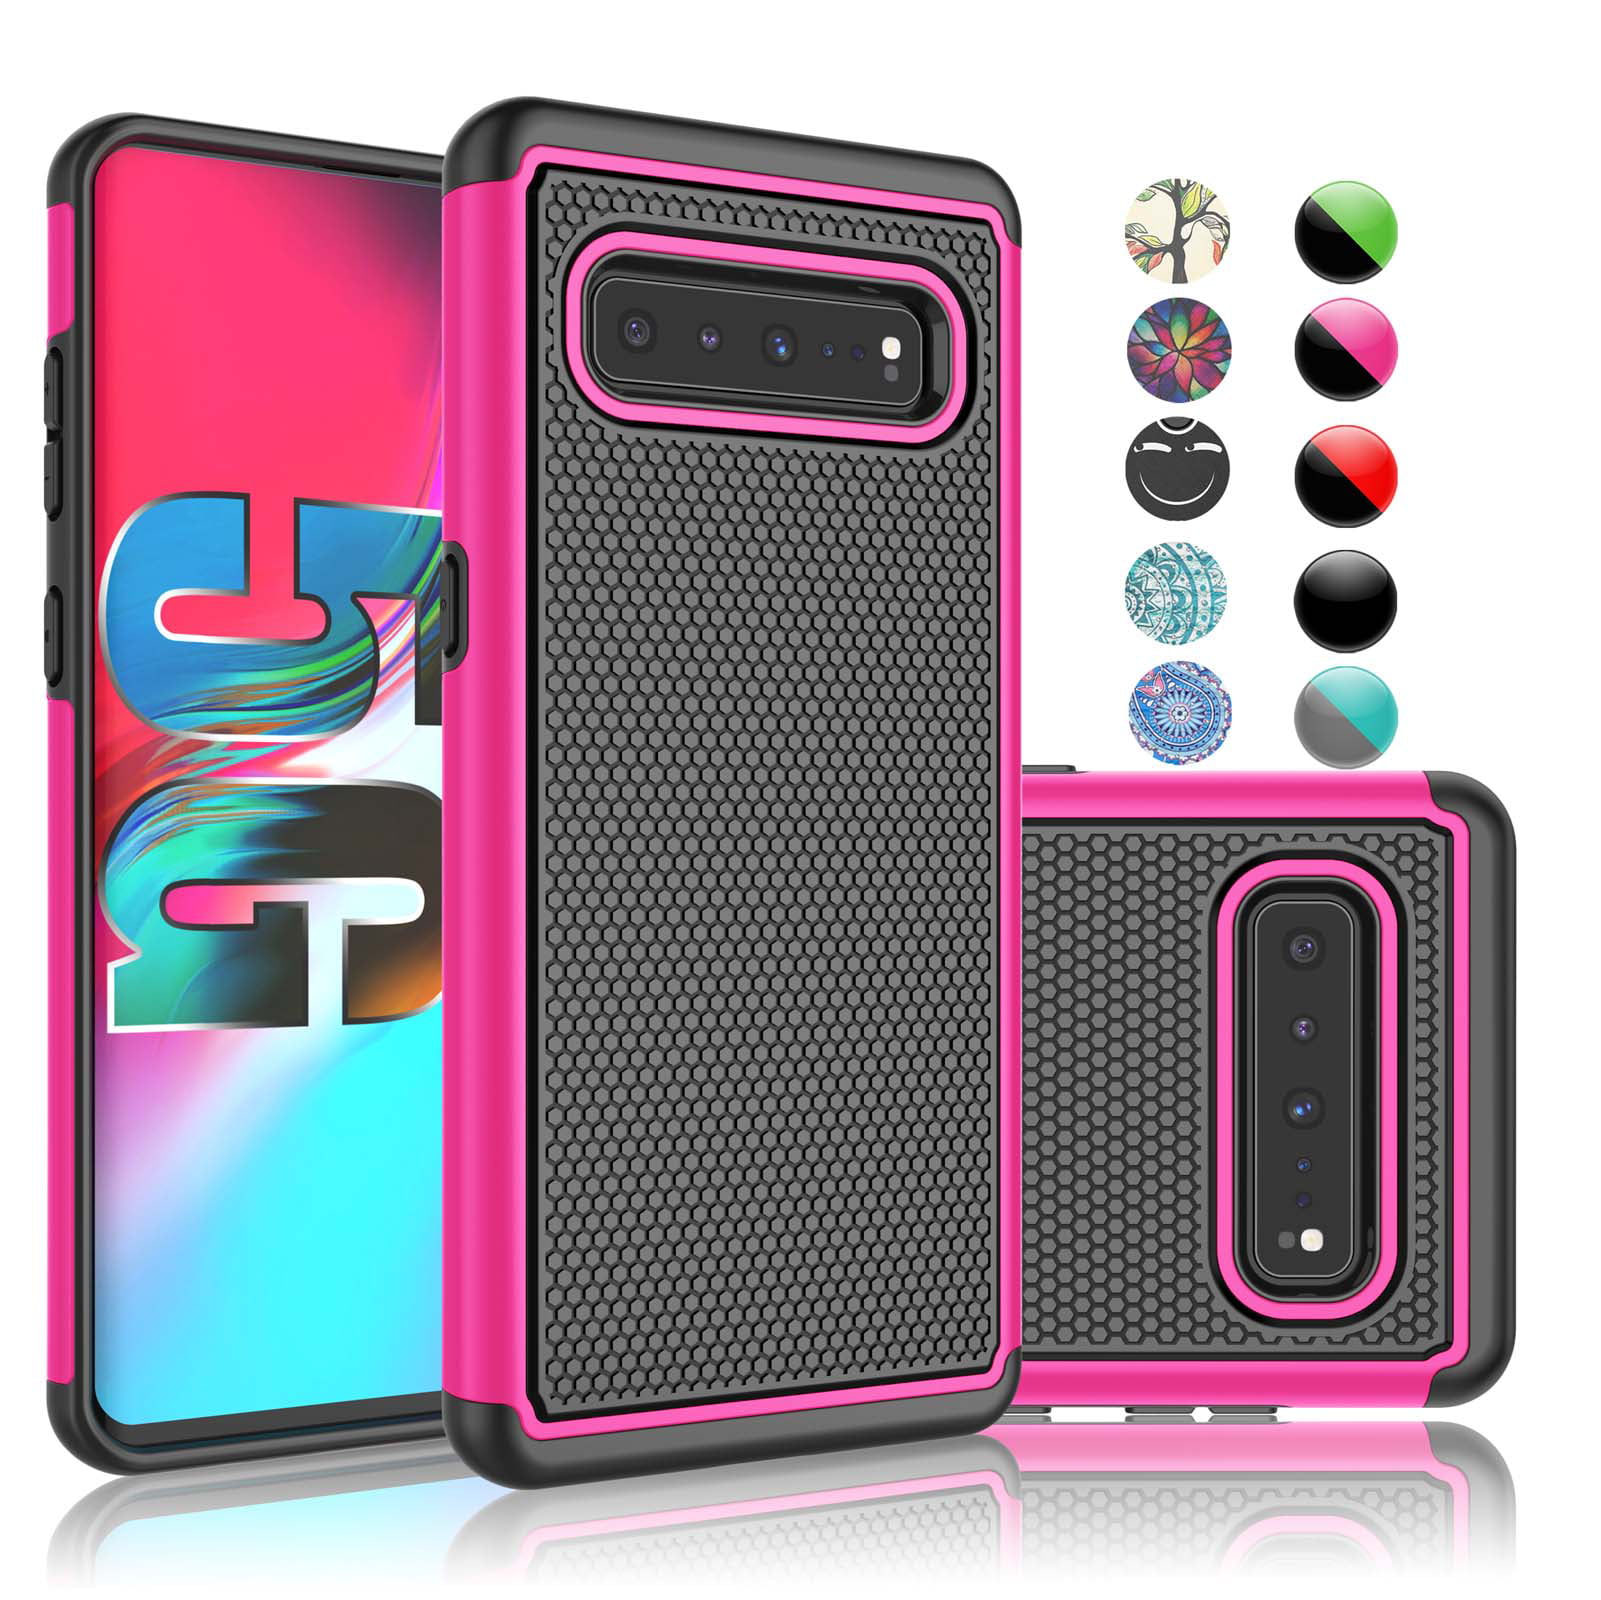 Samsung Galaxy S10 5G Case, Galaxy S10 5G Sturdy Case, Njjex [Shock  Absorption] Dual Layer Hybrid Armor Defender Protective Case Cover For  Smamsung Galaxy S10 5G 6.7